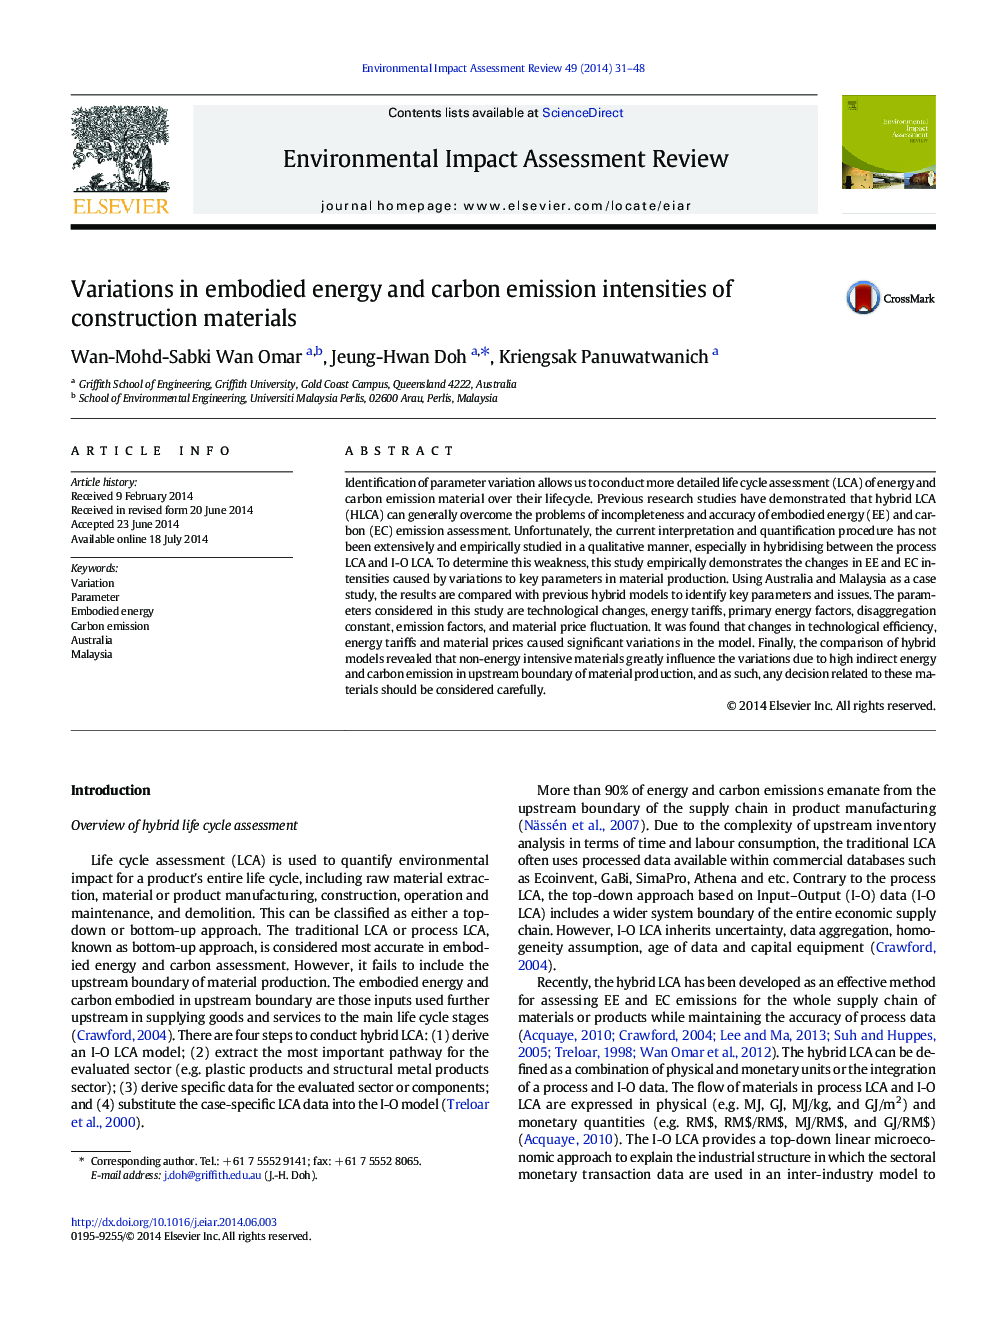 Variations in embodied energy and carbon emission intensities of construction materials